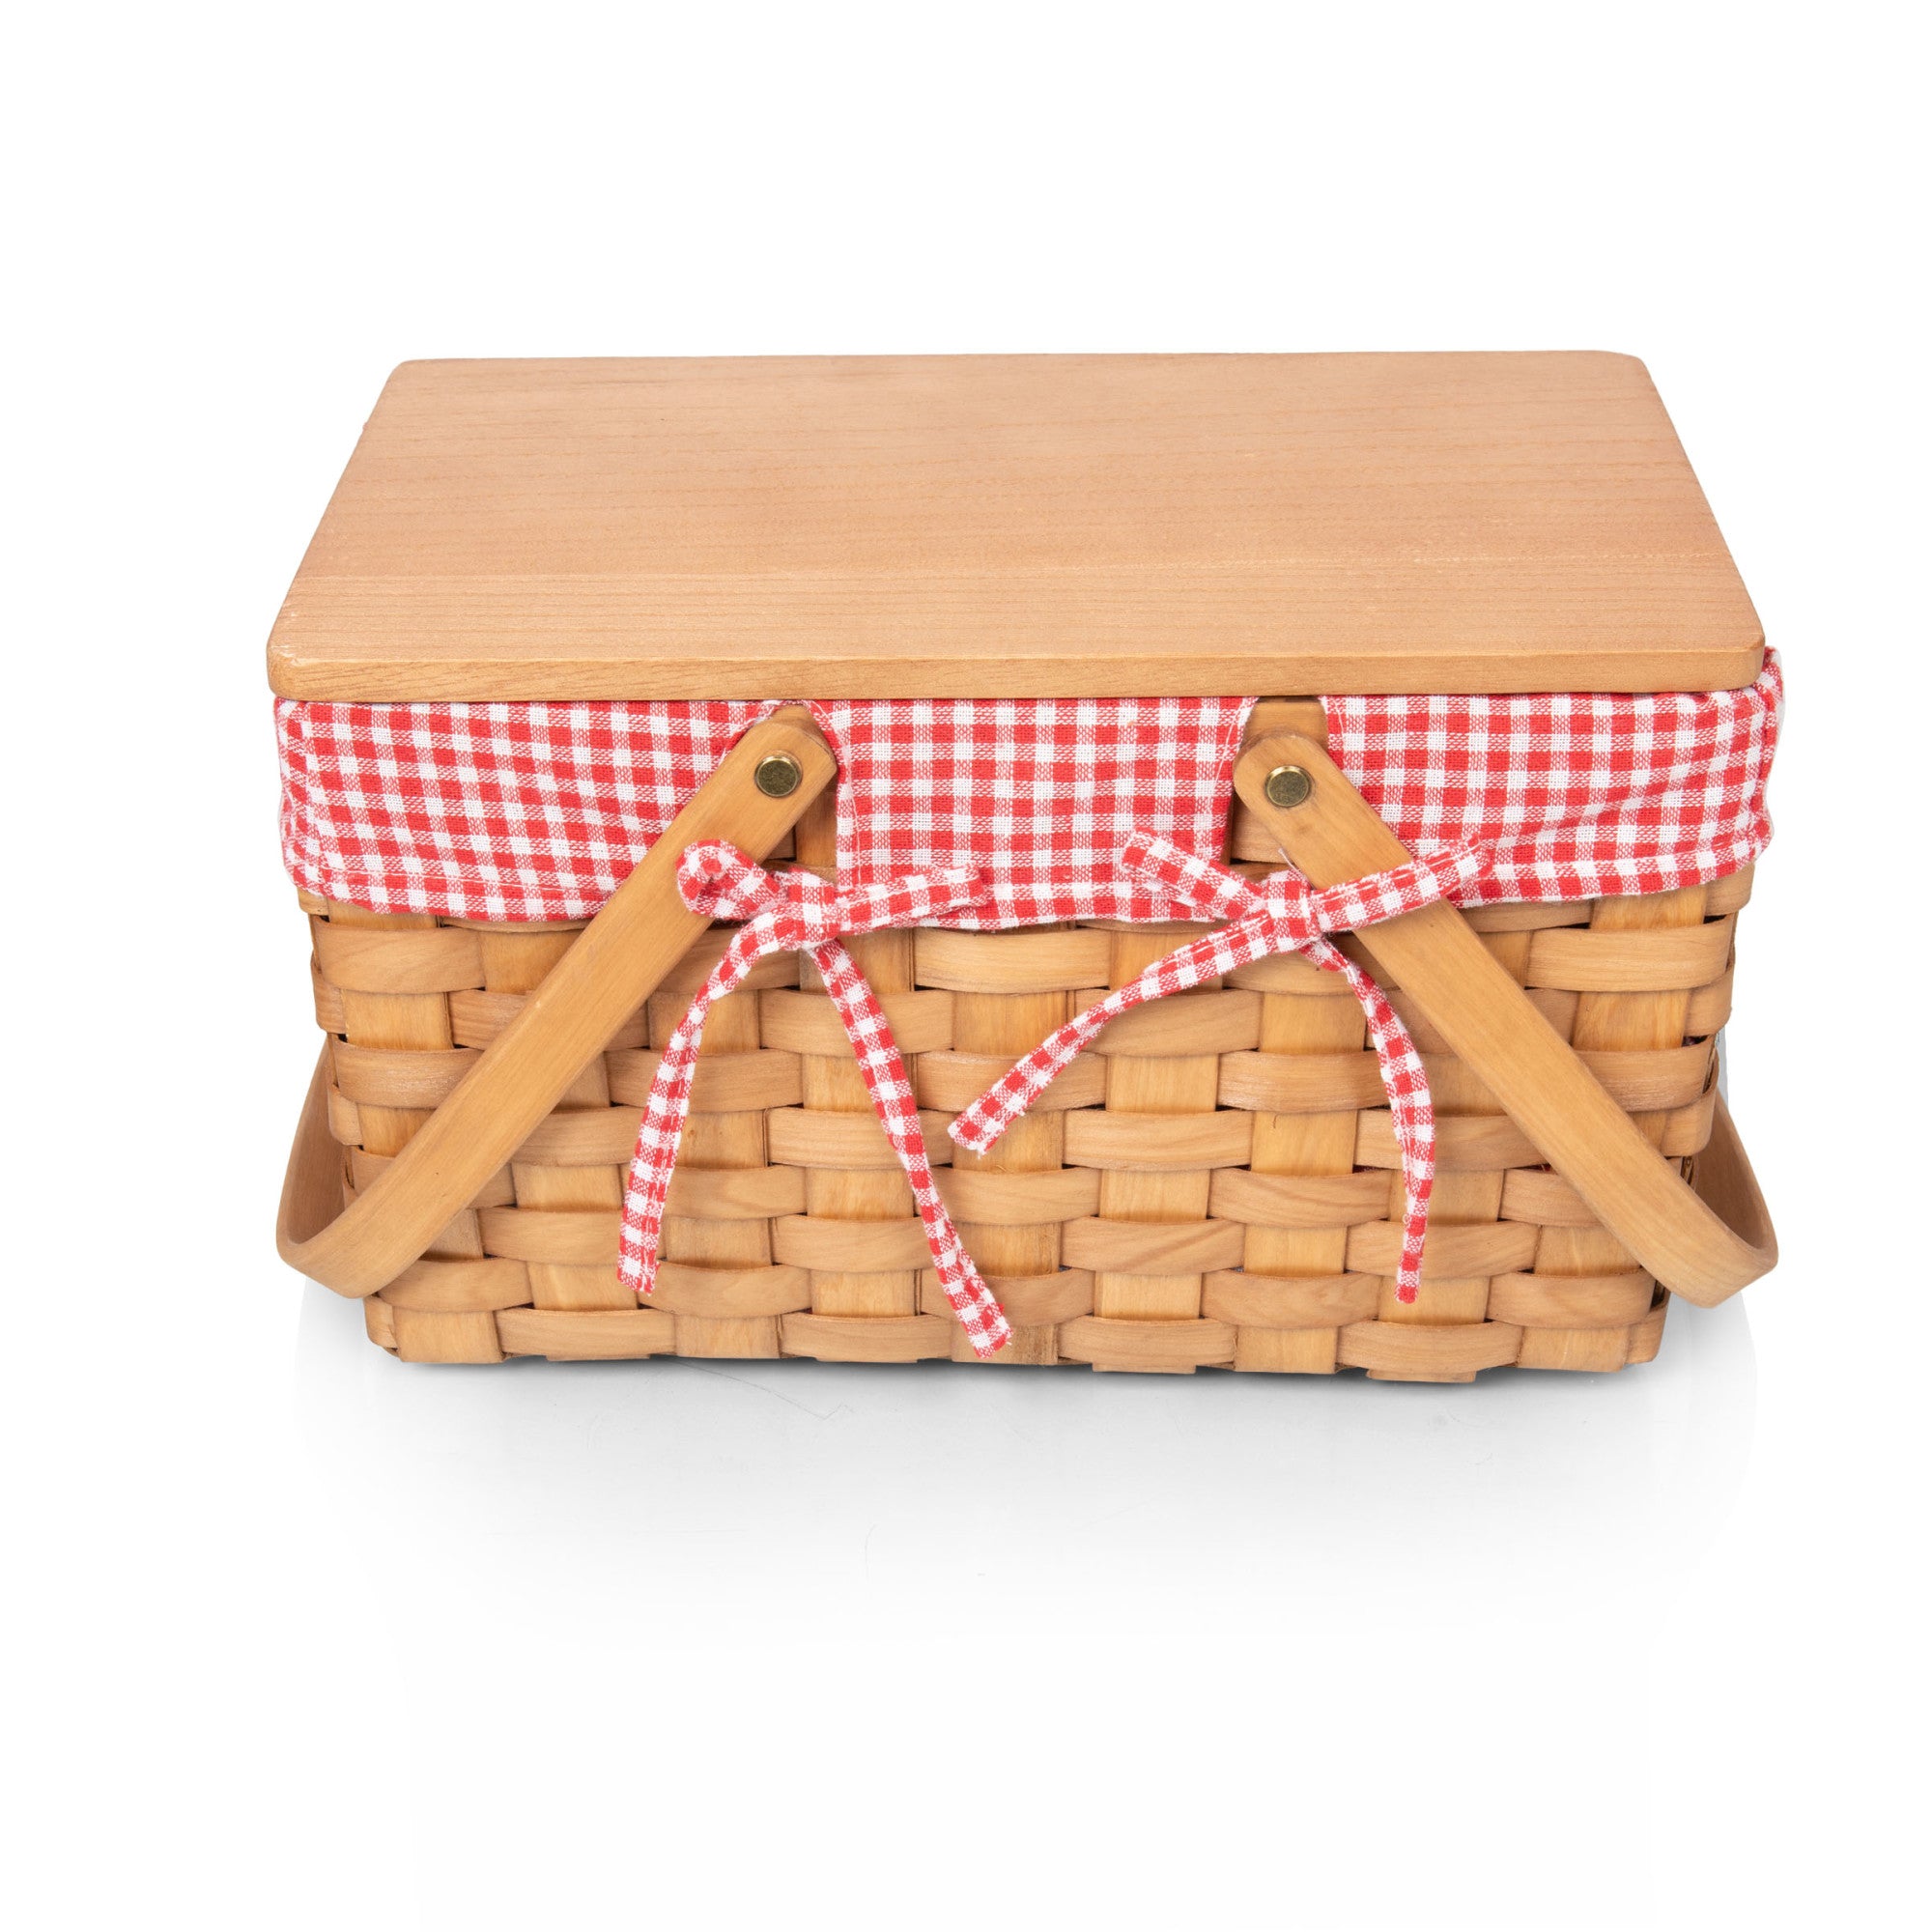 Piccola Picnic Basket - Red and White Gingham Picnic Service for 2